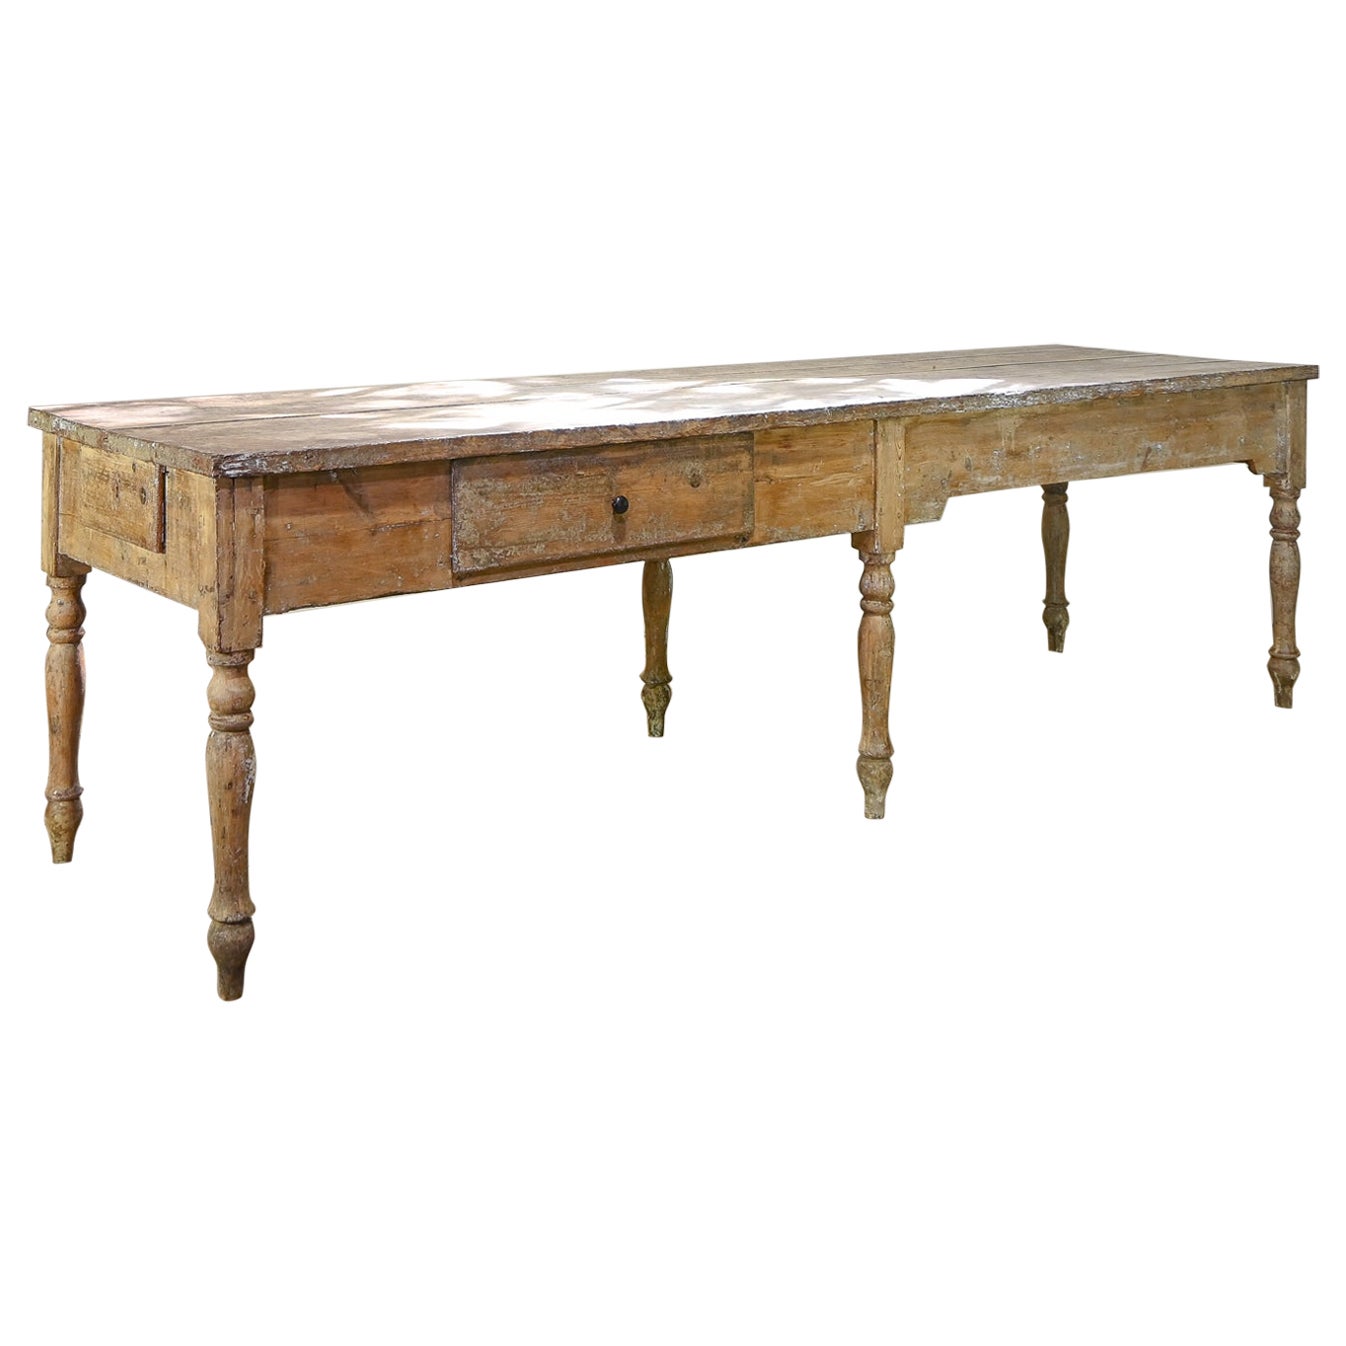 A Large 18th Century French Painted Farmhouse Dining Table